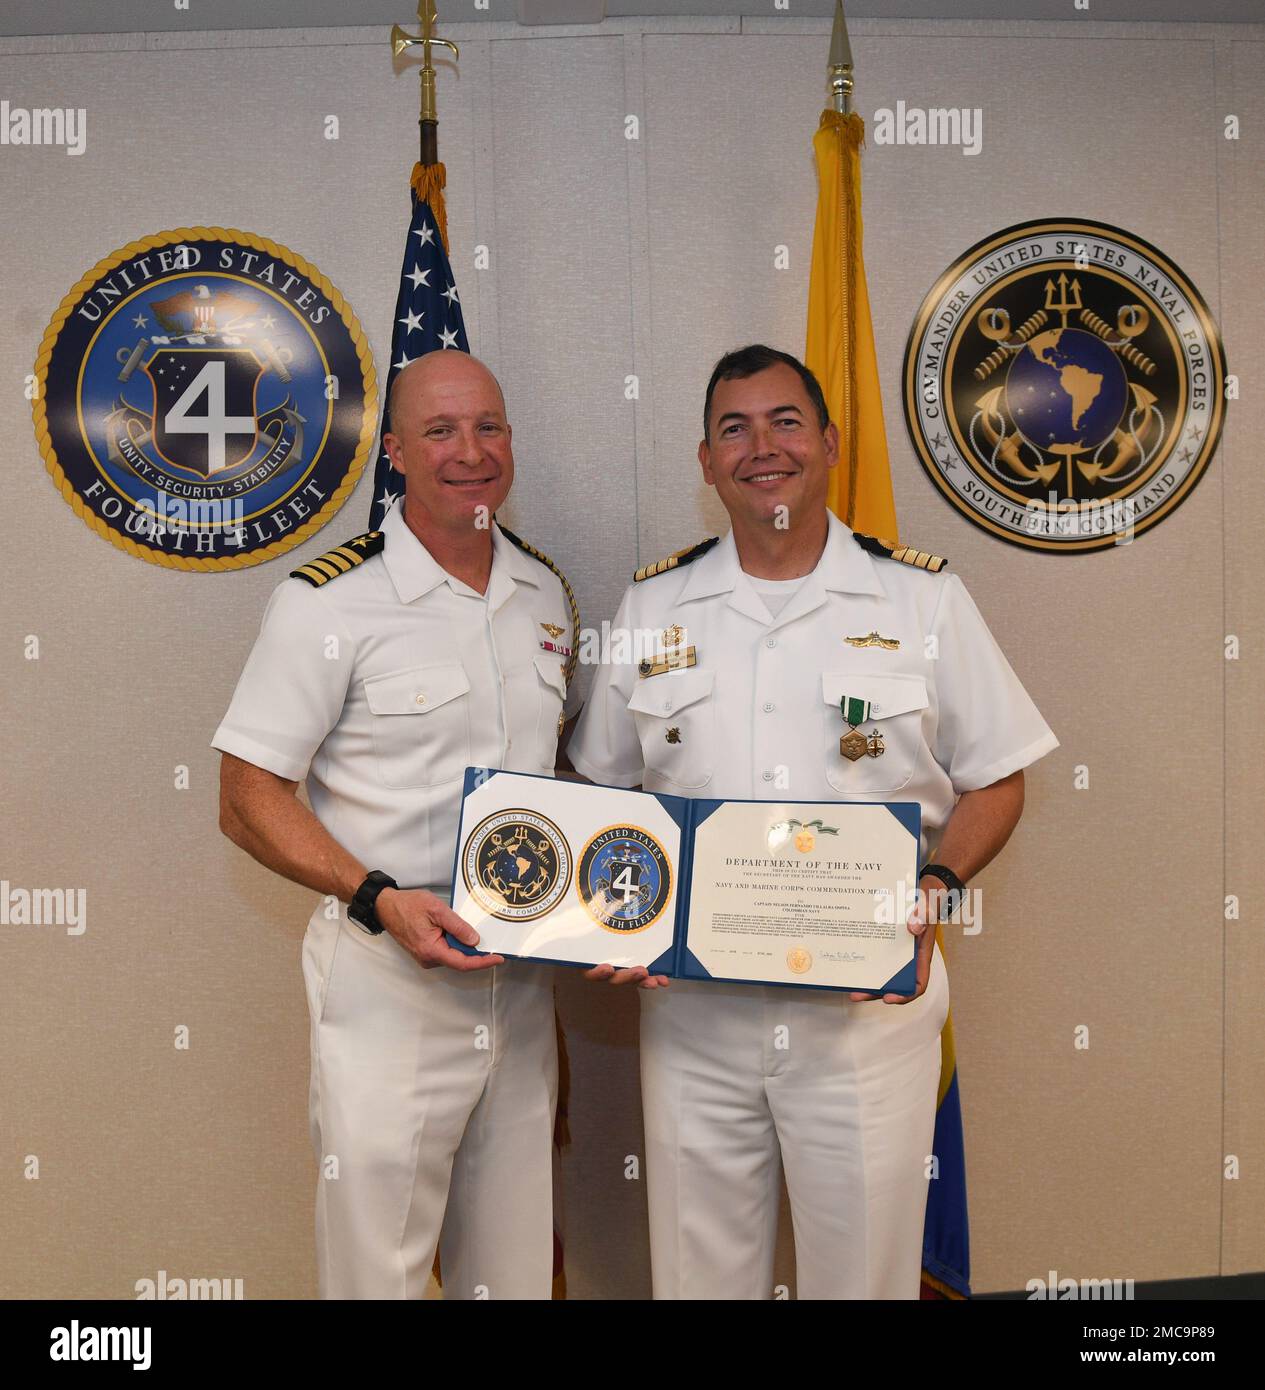 220628-N-DB801-0370  MAYPORT, Fla. – (June 28, 2022) – Colombian navy Capt. Nelson Villalba, right, a Foreign Liaison Officer assigned to U.S. Naval Forces Southern Command/U.S. 4th Fleet poses with Capt. Michael Weaver, U.S. 4th Fleet Chief of Staff, after receiving the Navy and Marine Corps Commendation Medal during his end of tour award ceremony at fleet headquarters, June 28, 2022. Villalba served at U.S. 4th Fleet from Jan. 1, 2021 to June 30, 2022. U.S. Naval Forces Southern Command/U.S. 4th Fleet supports U.S. Southern Command’s joint and combined military operations by employing mariti Stock Photo